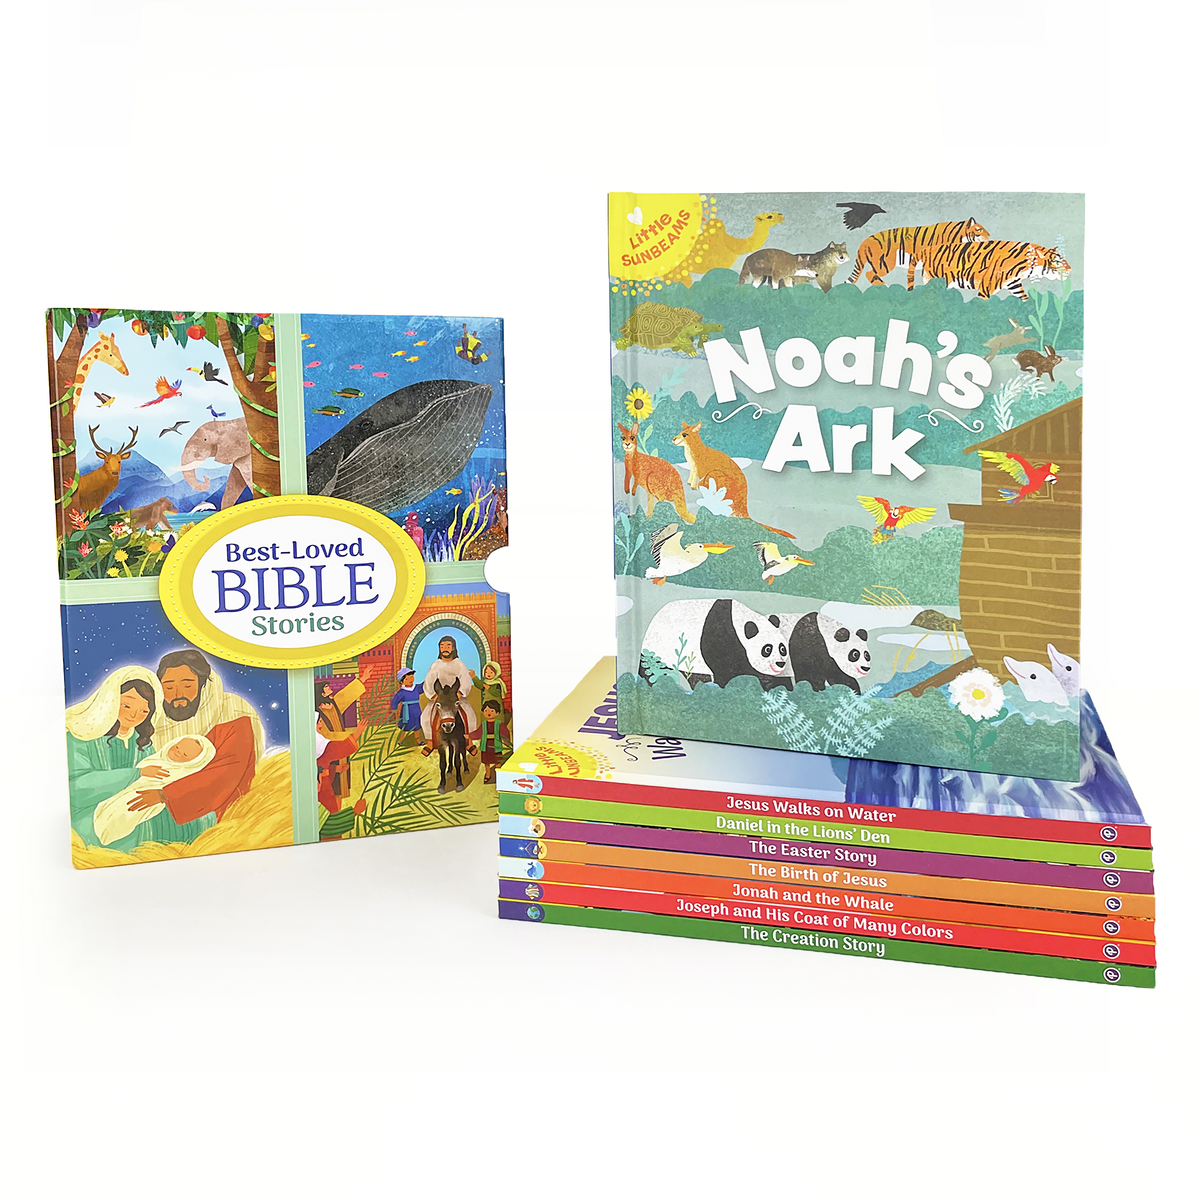 Best-Loved Bible Stories 8-Book Library